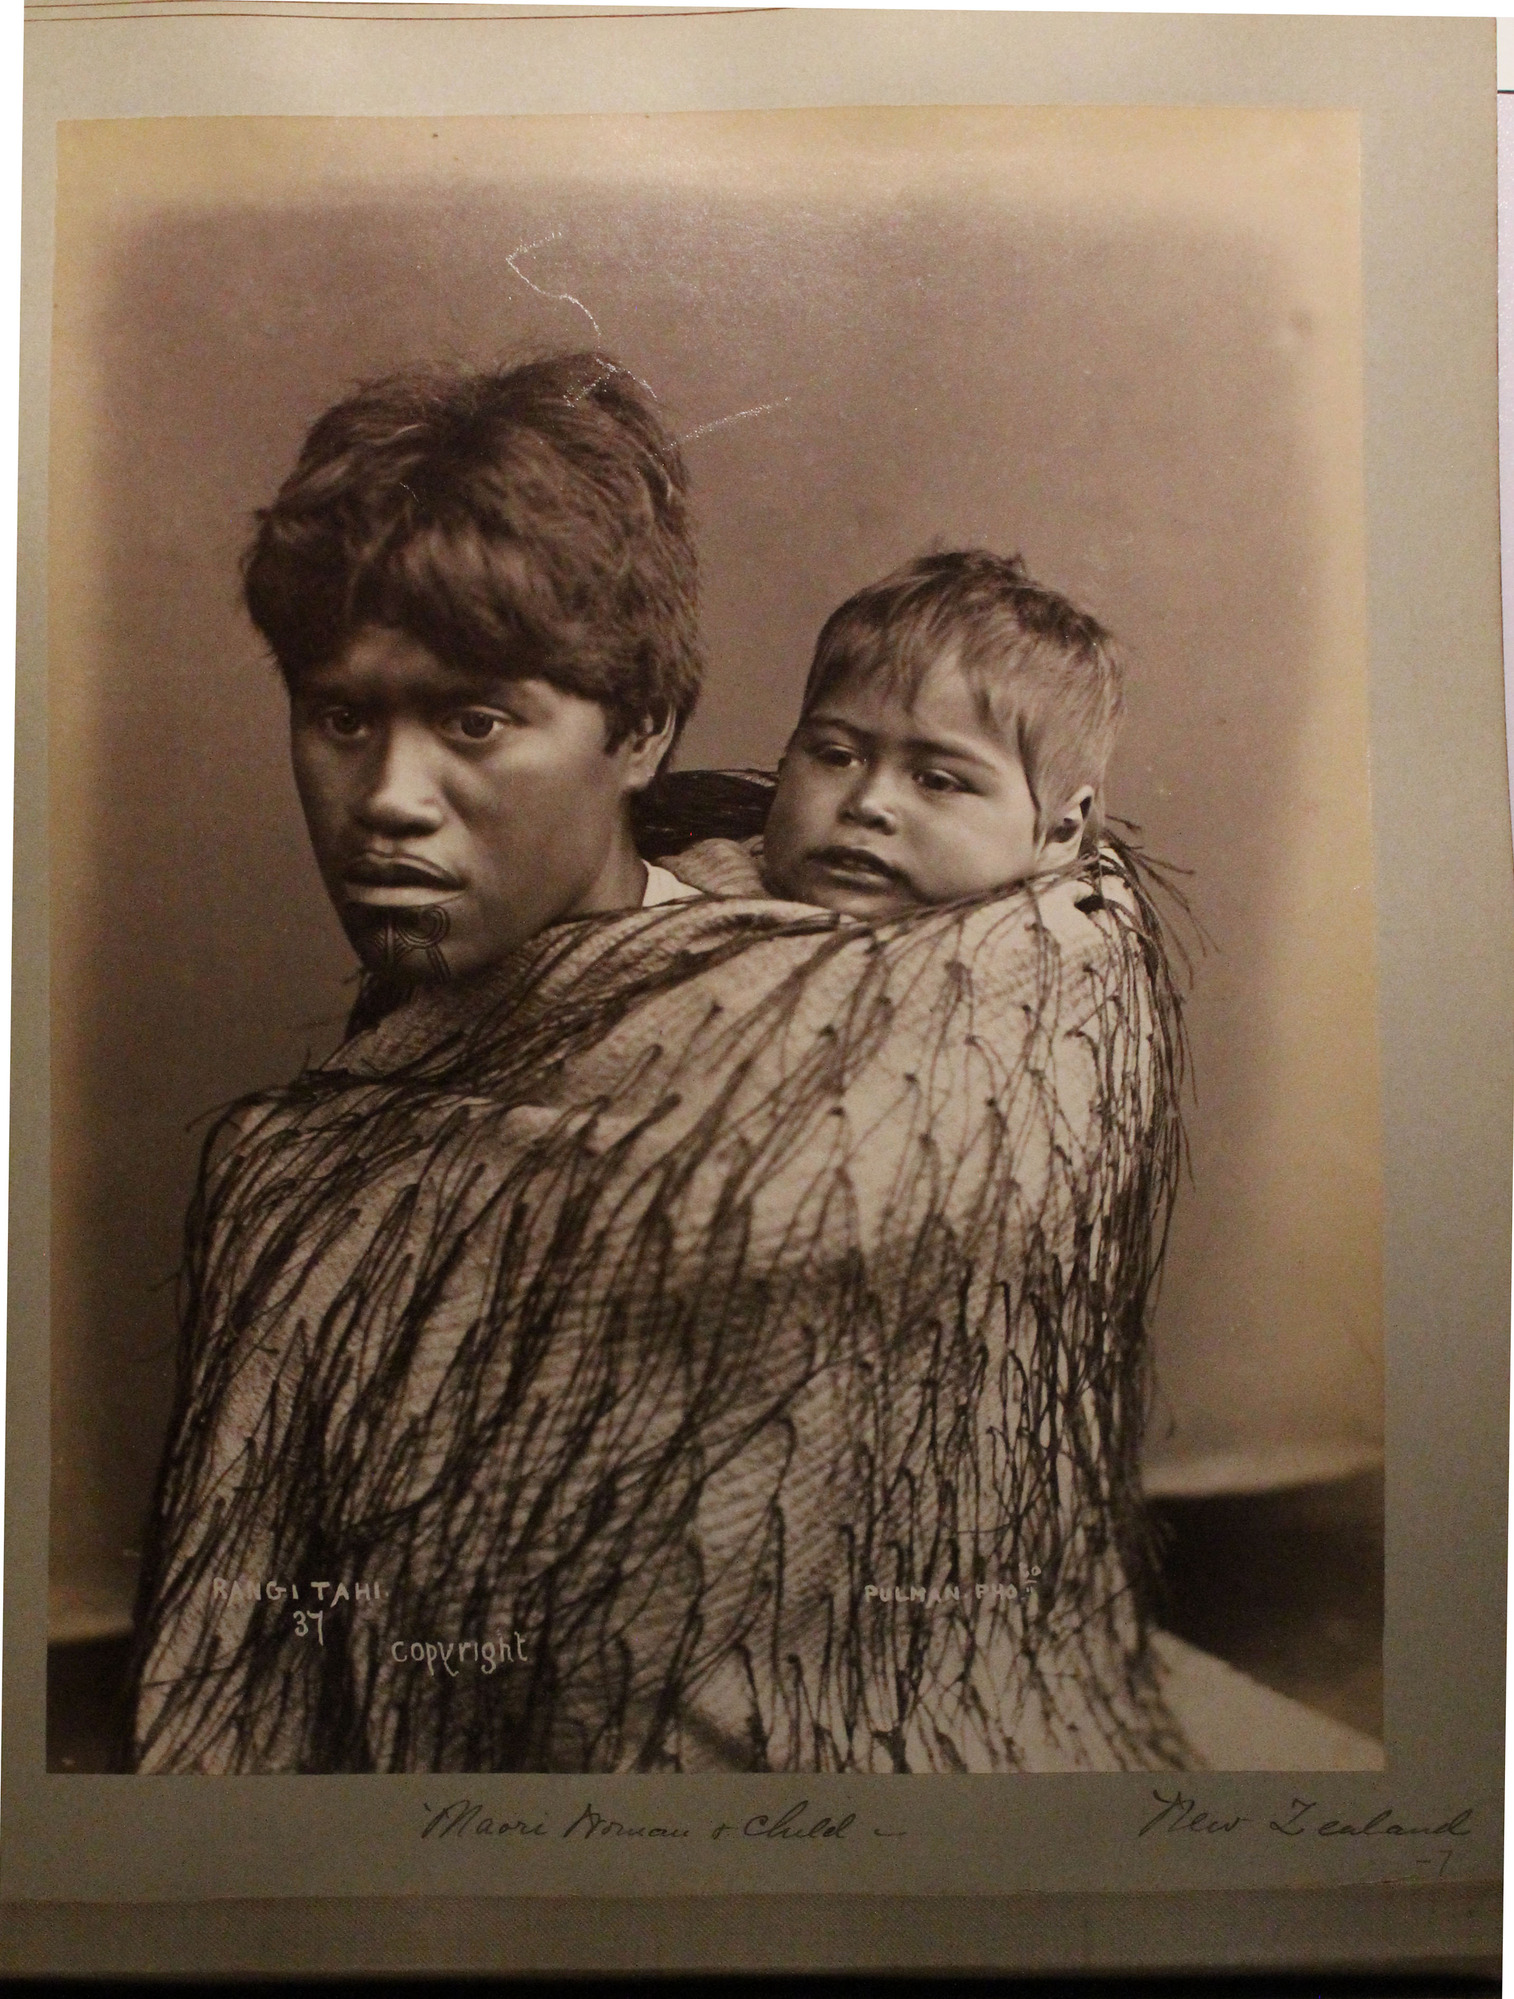 Maori woman and baby posed in traditional cloak.